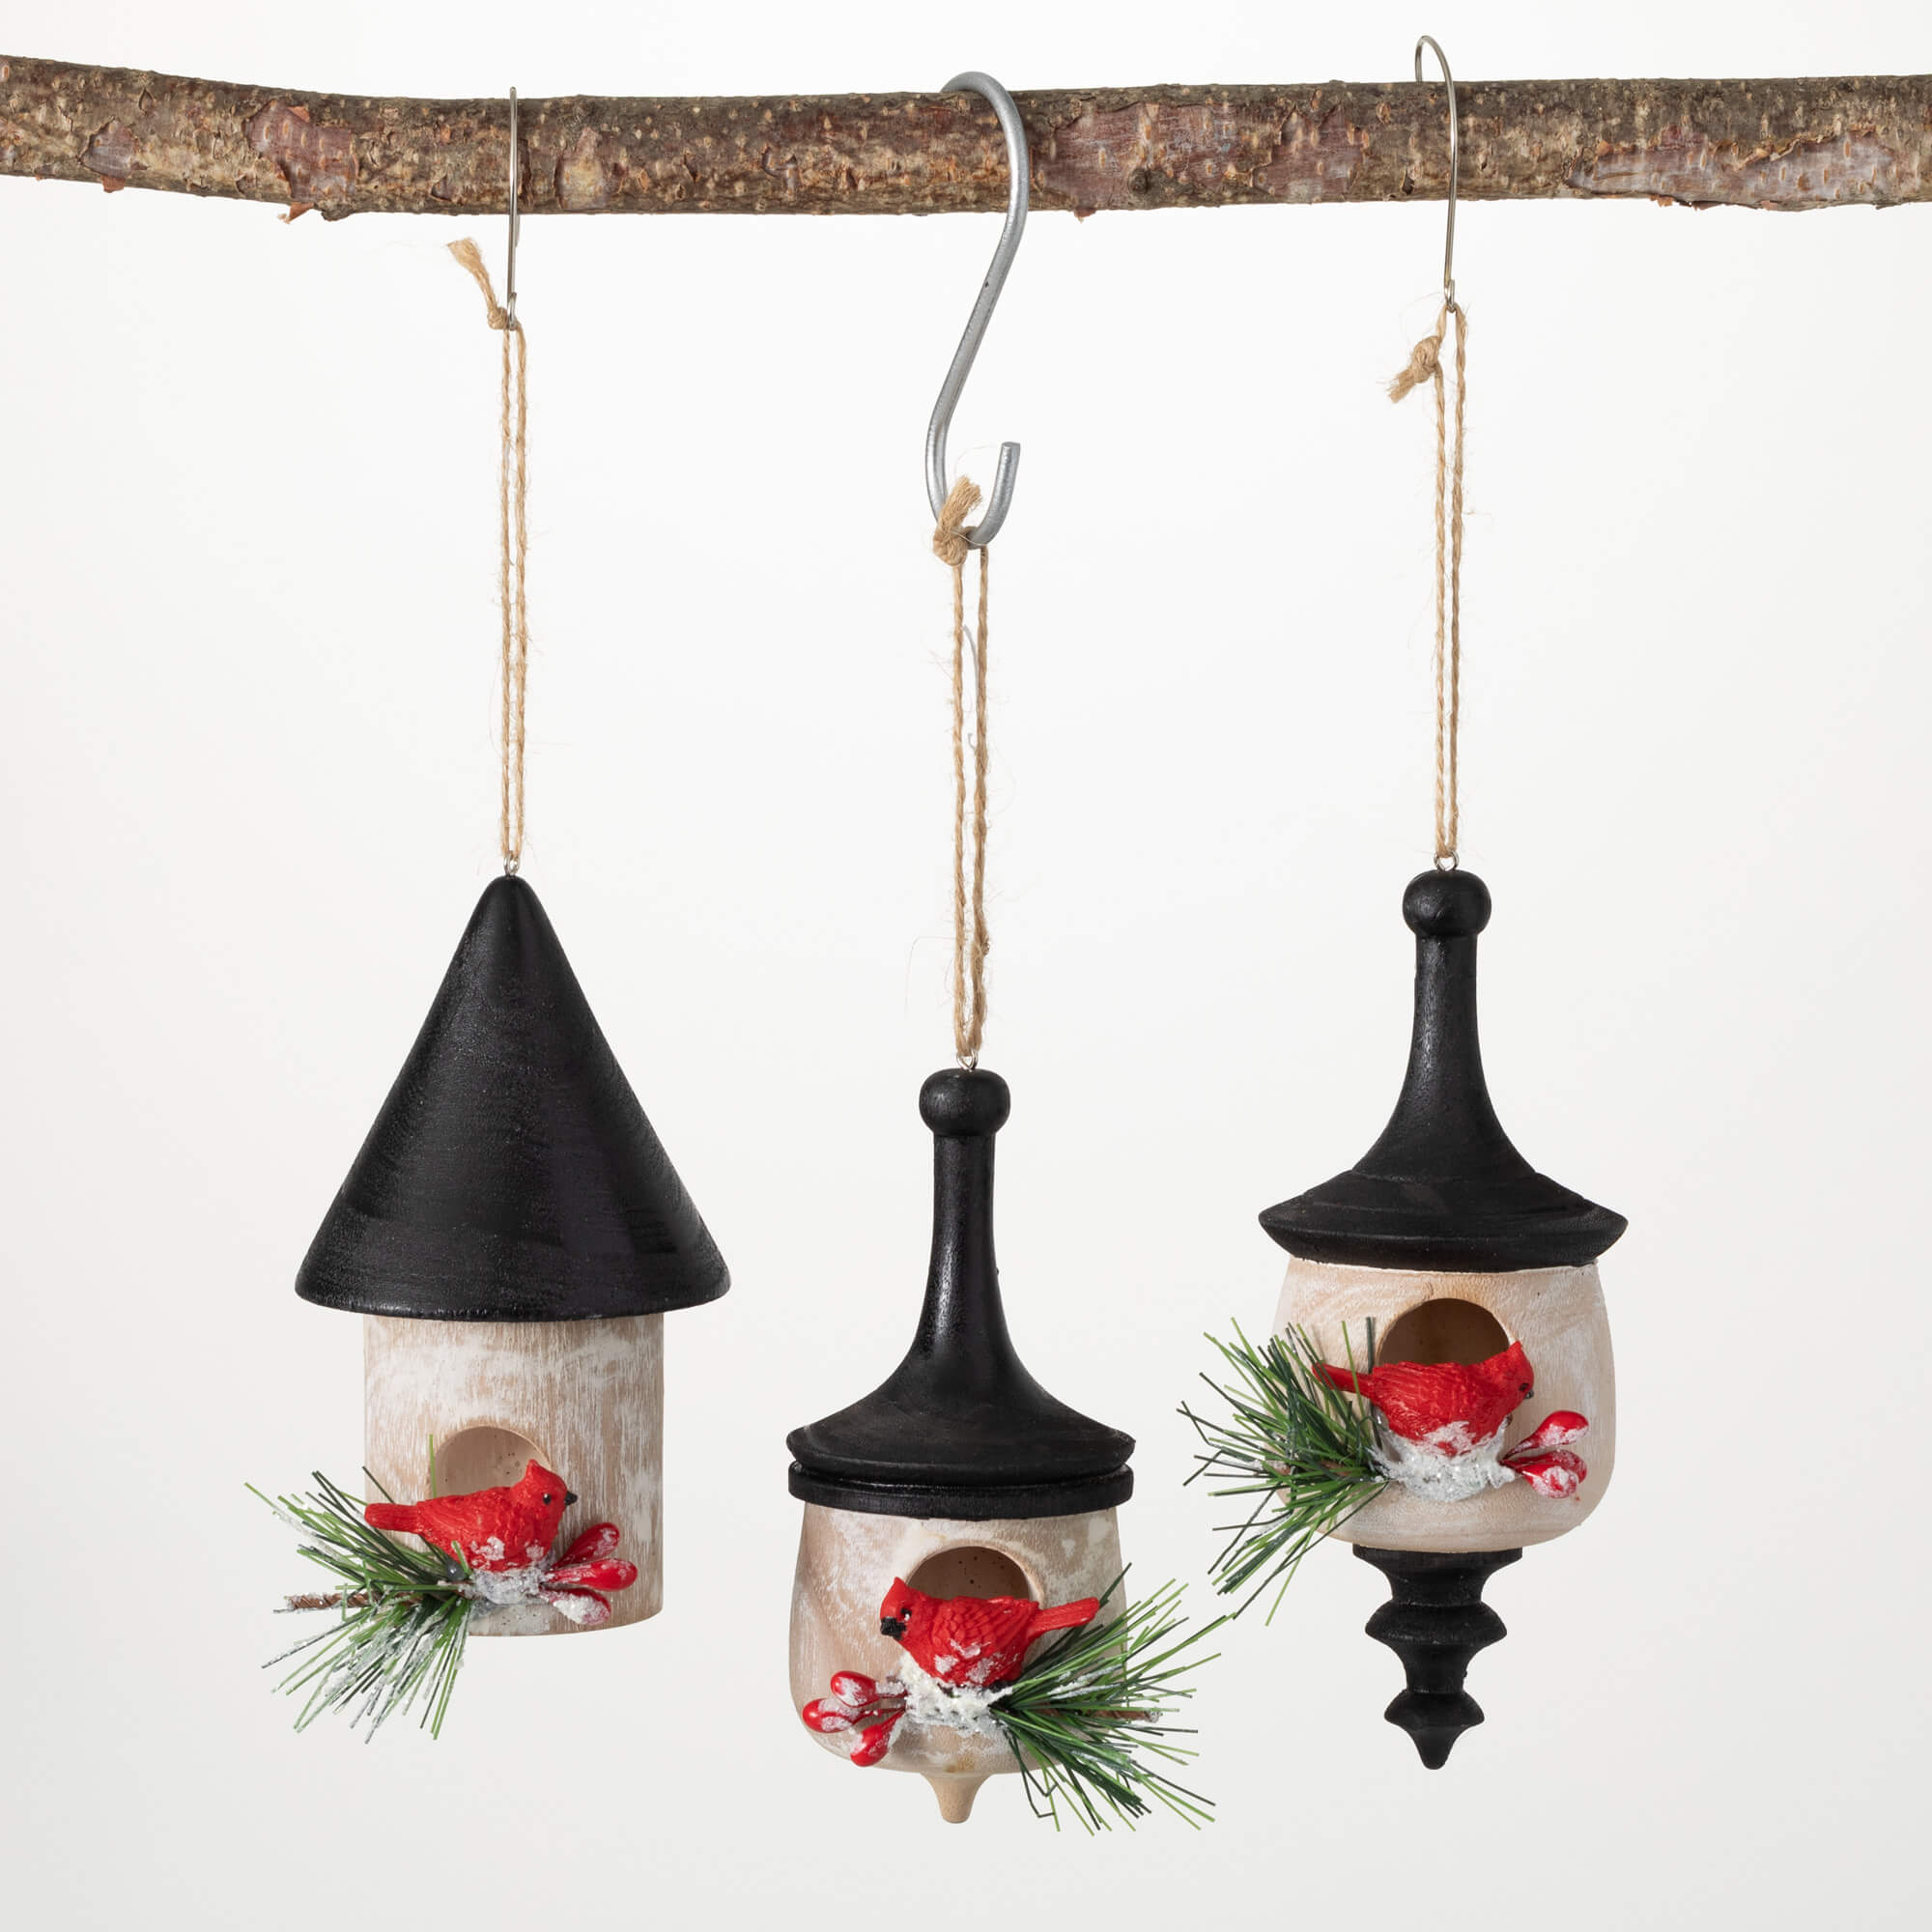 FROSTED BIRDHOUSE ORNAMENT SET